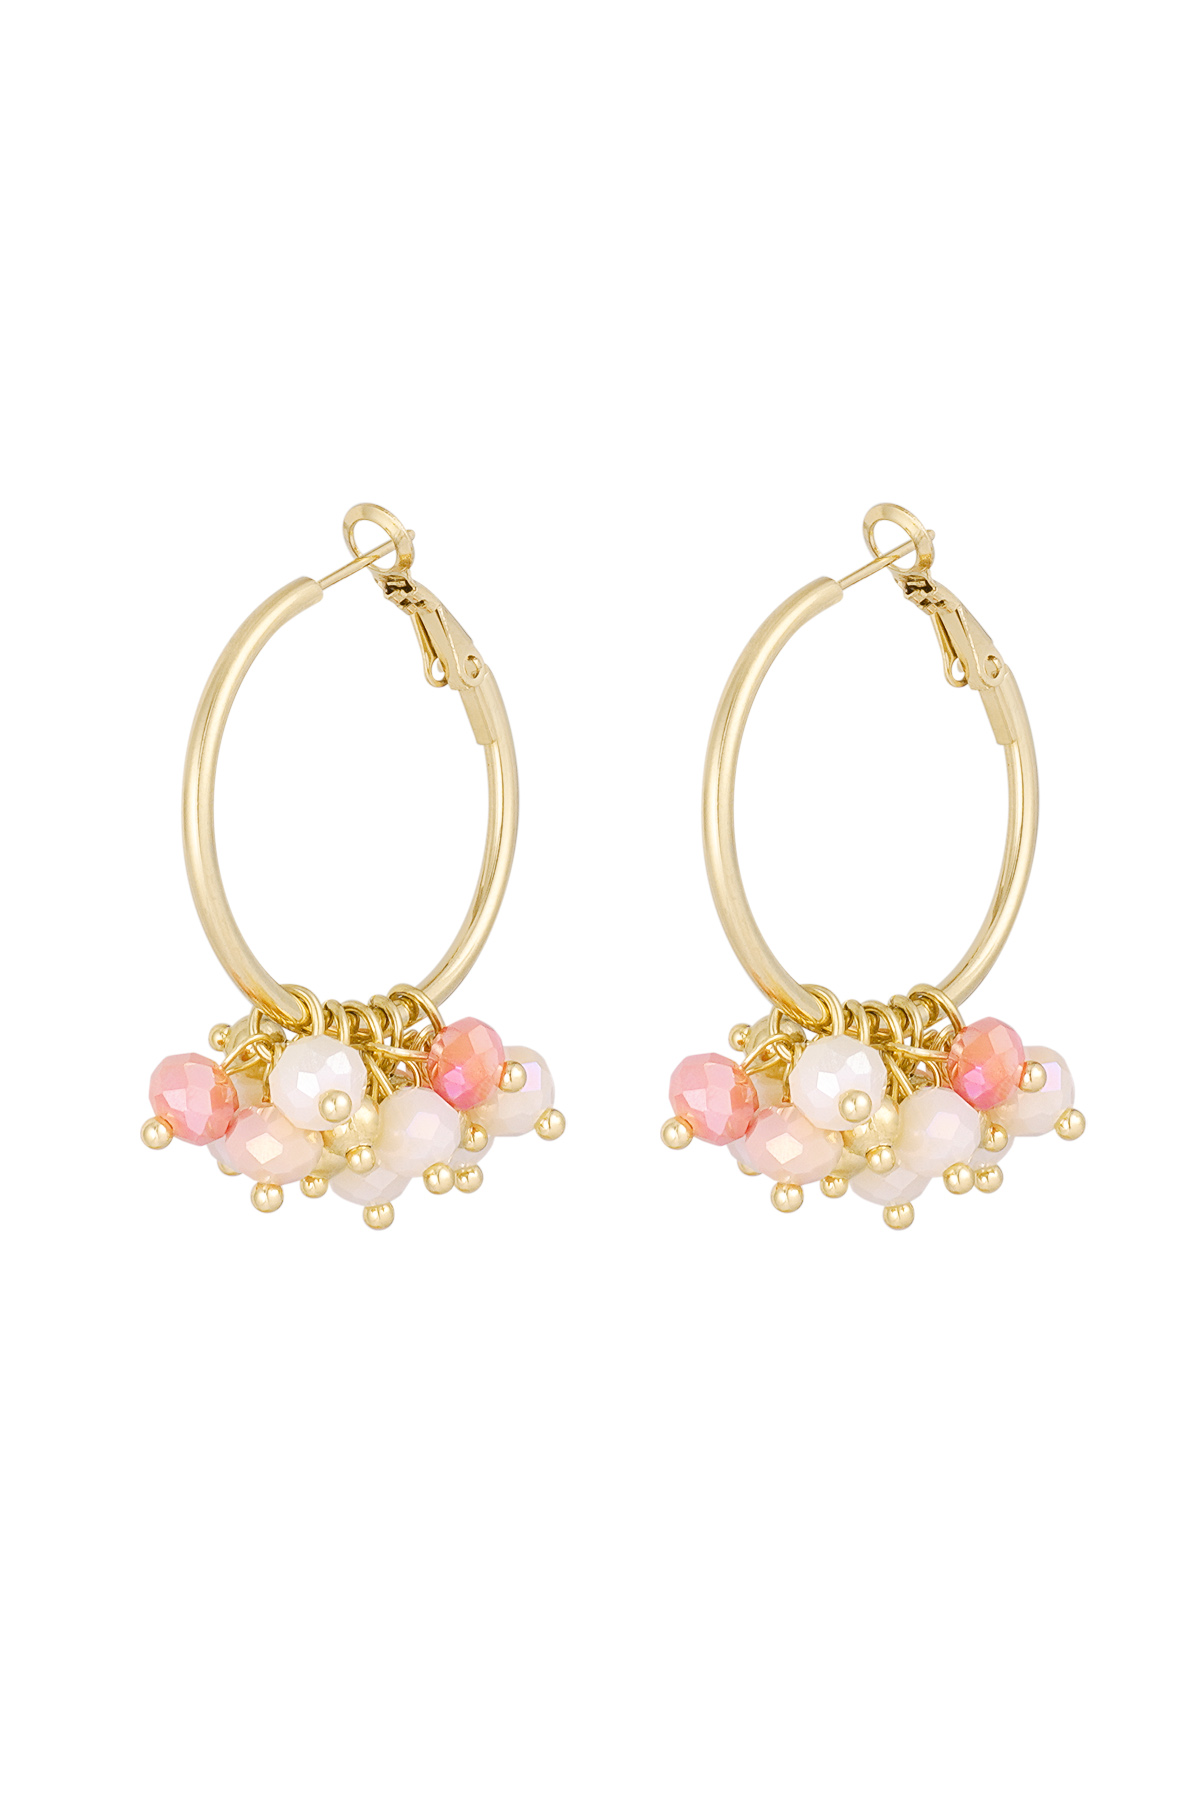 Cheerful earring with colored crystals - coral